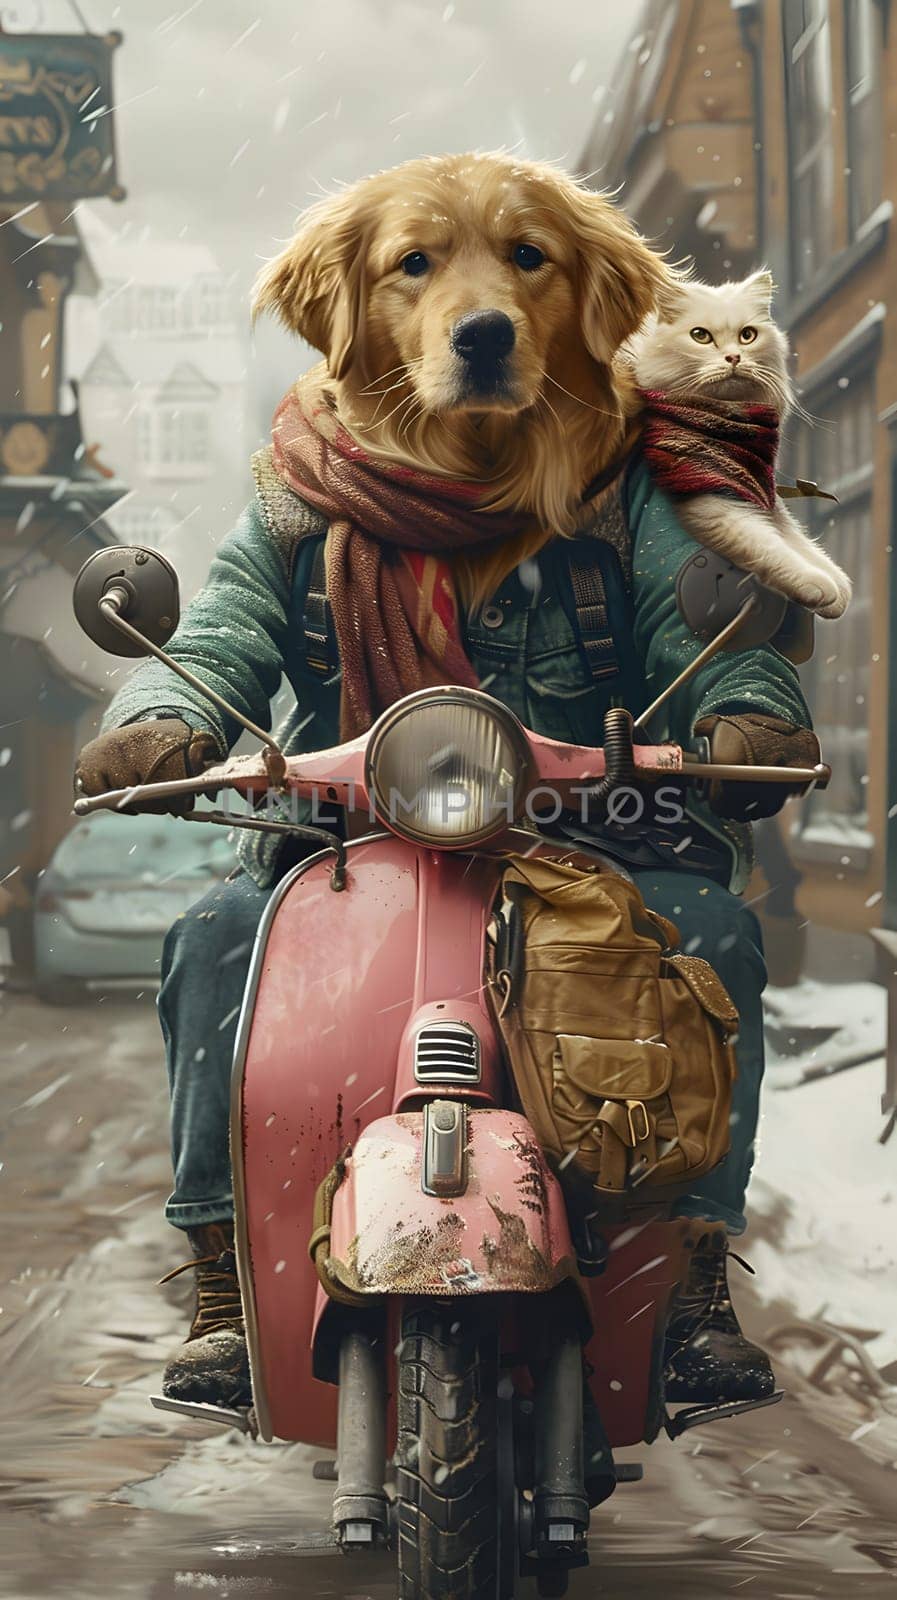 Dog and cat riding scooter together, with cat on dogs back by Nadtochiy